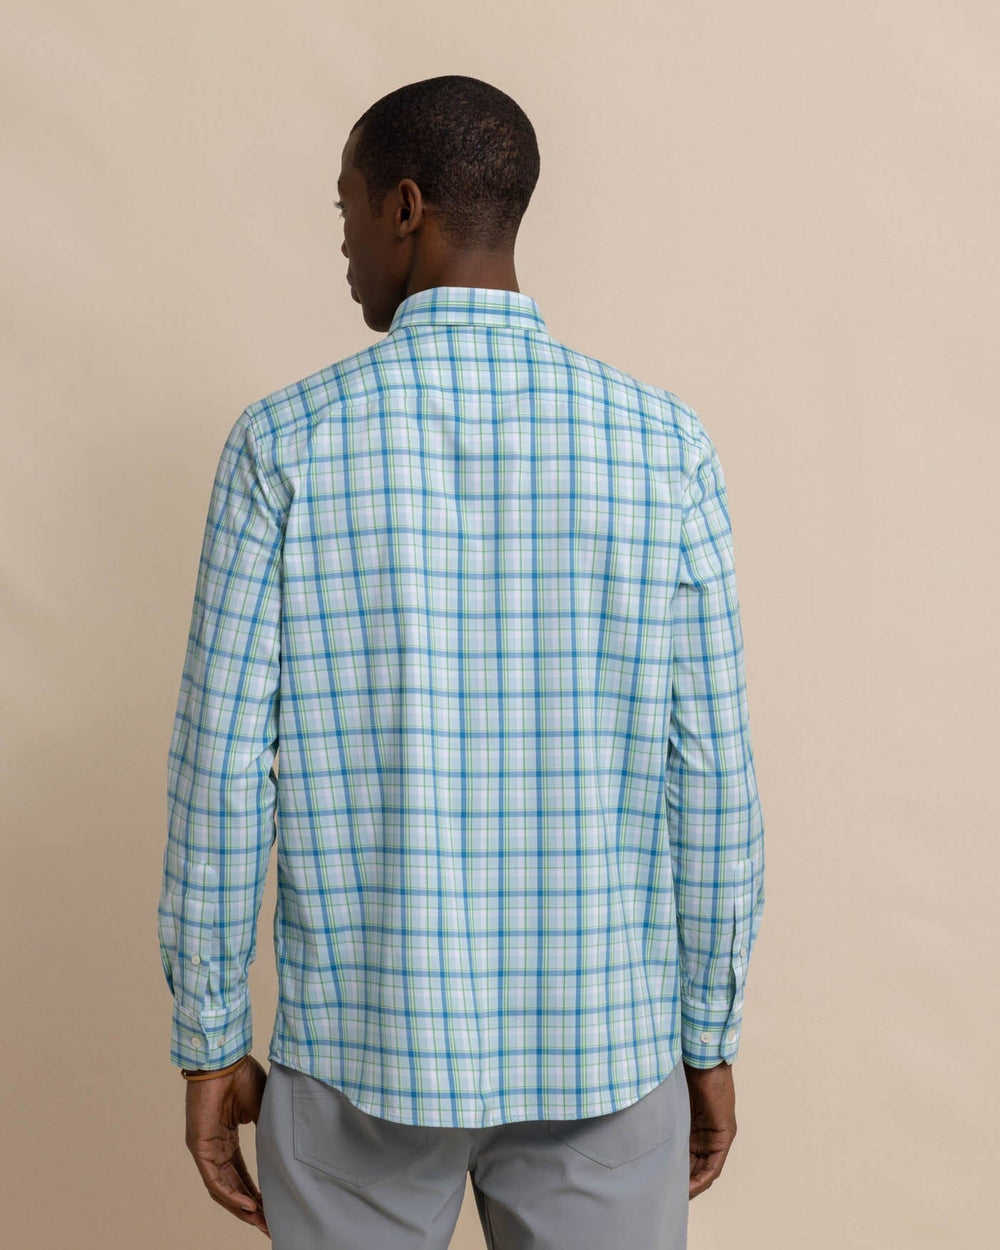 The back view of the Southern Tide brrr Whalehead Plaid Intercoastal Sport Shirt by Southern Tide - Chilled Blue